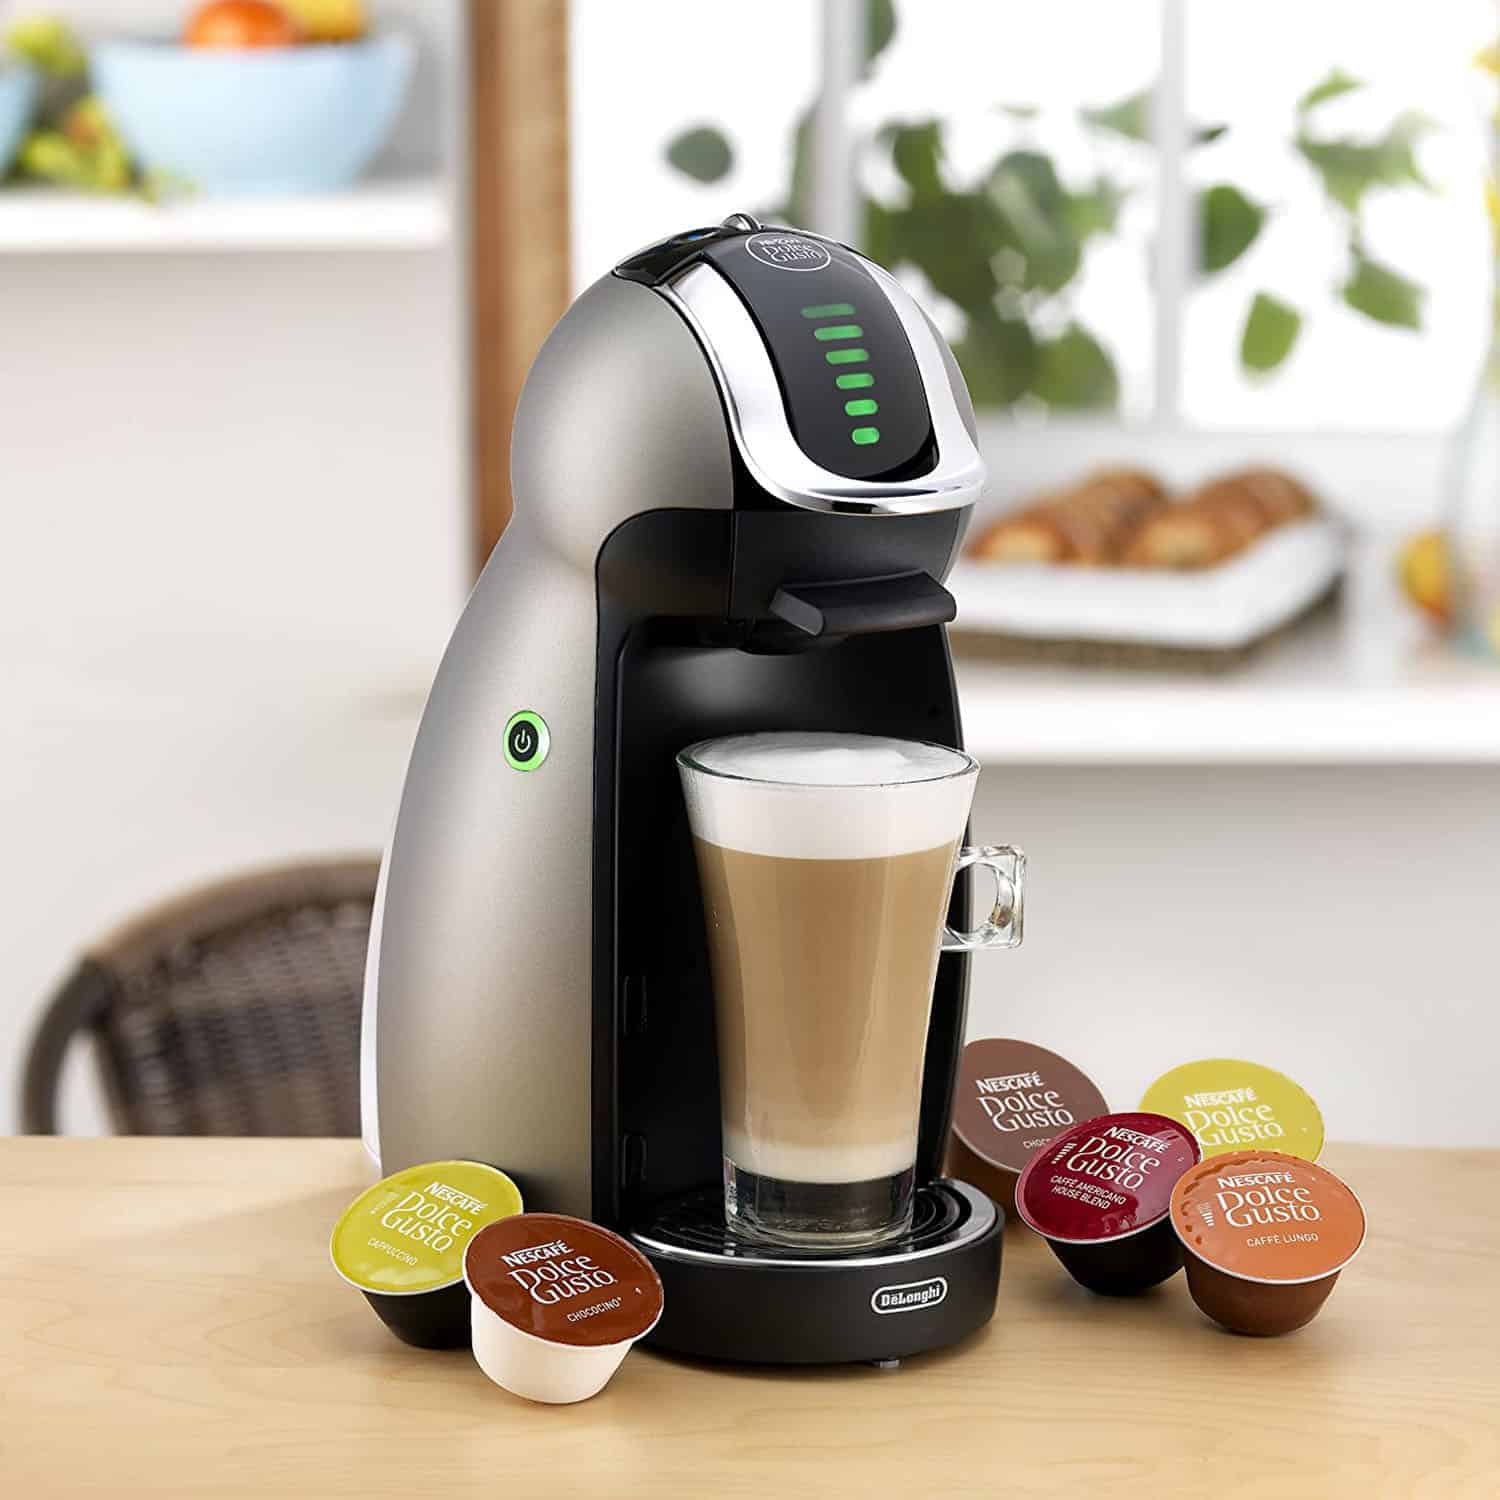 How to Descale a Dolce Gusto Coffee Machine - 8 EASY Steps